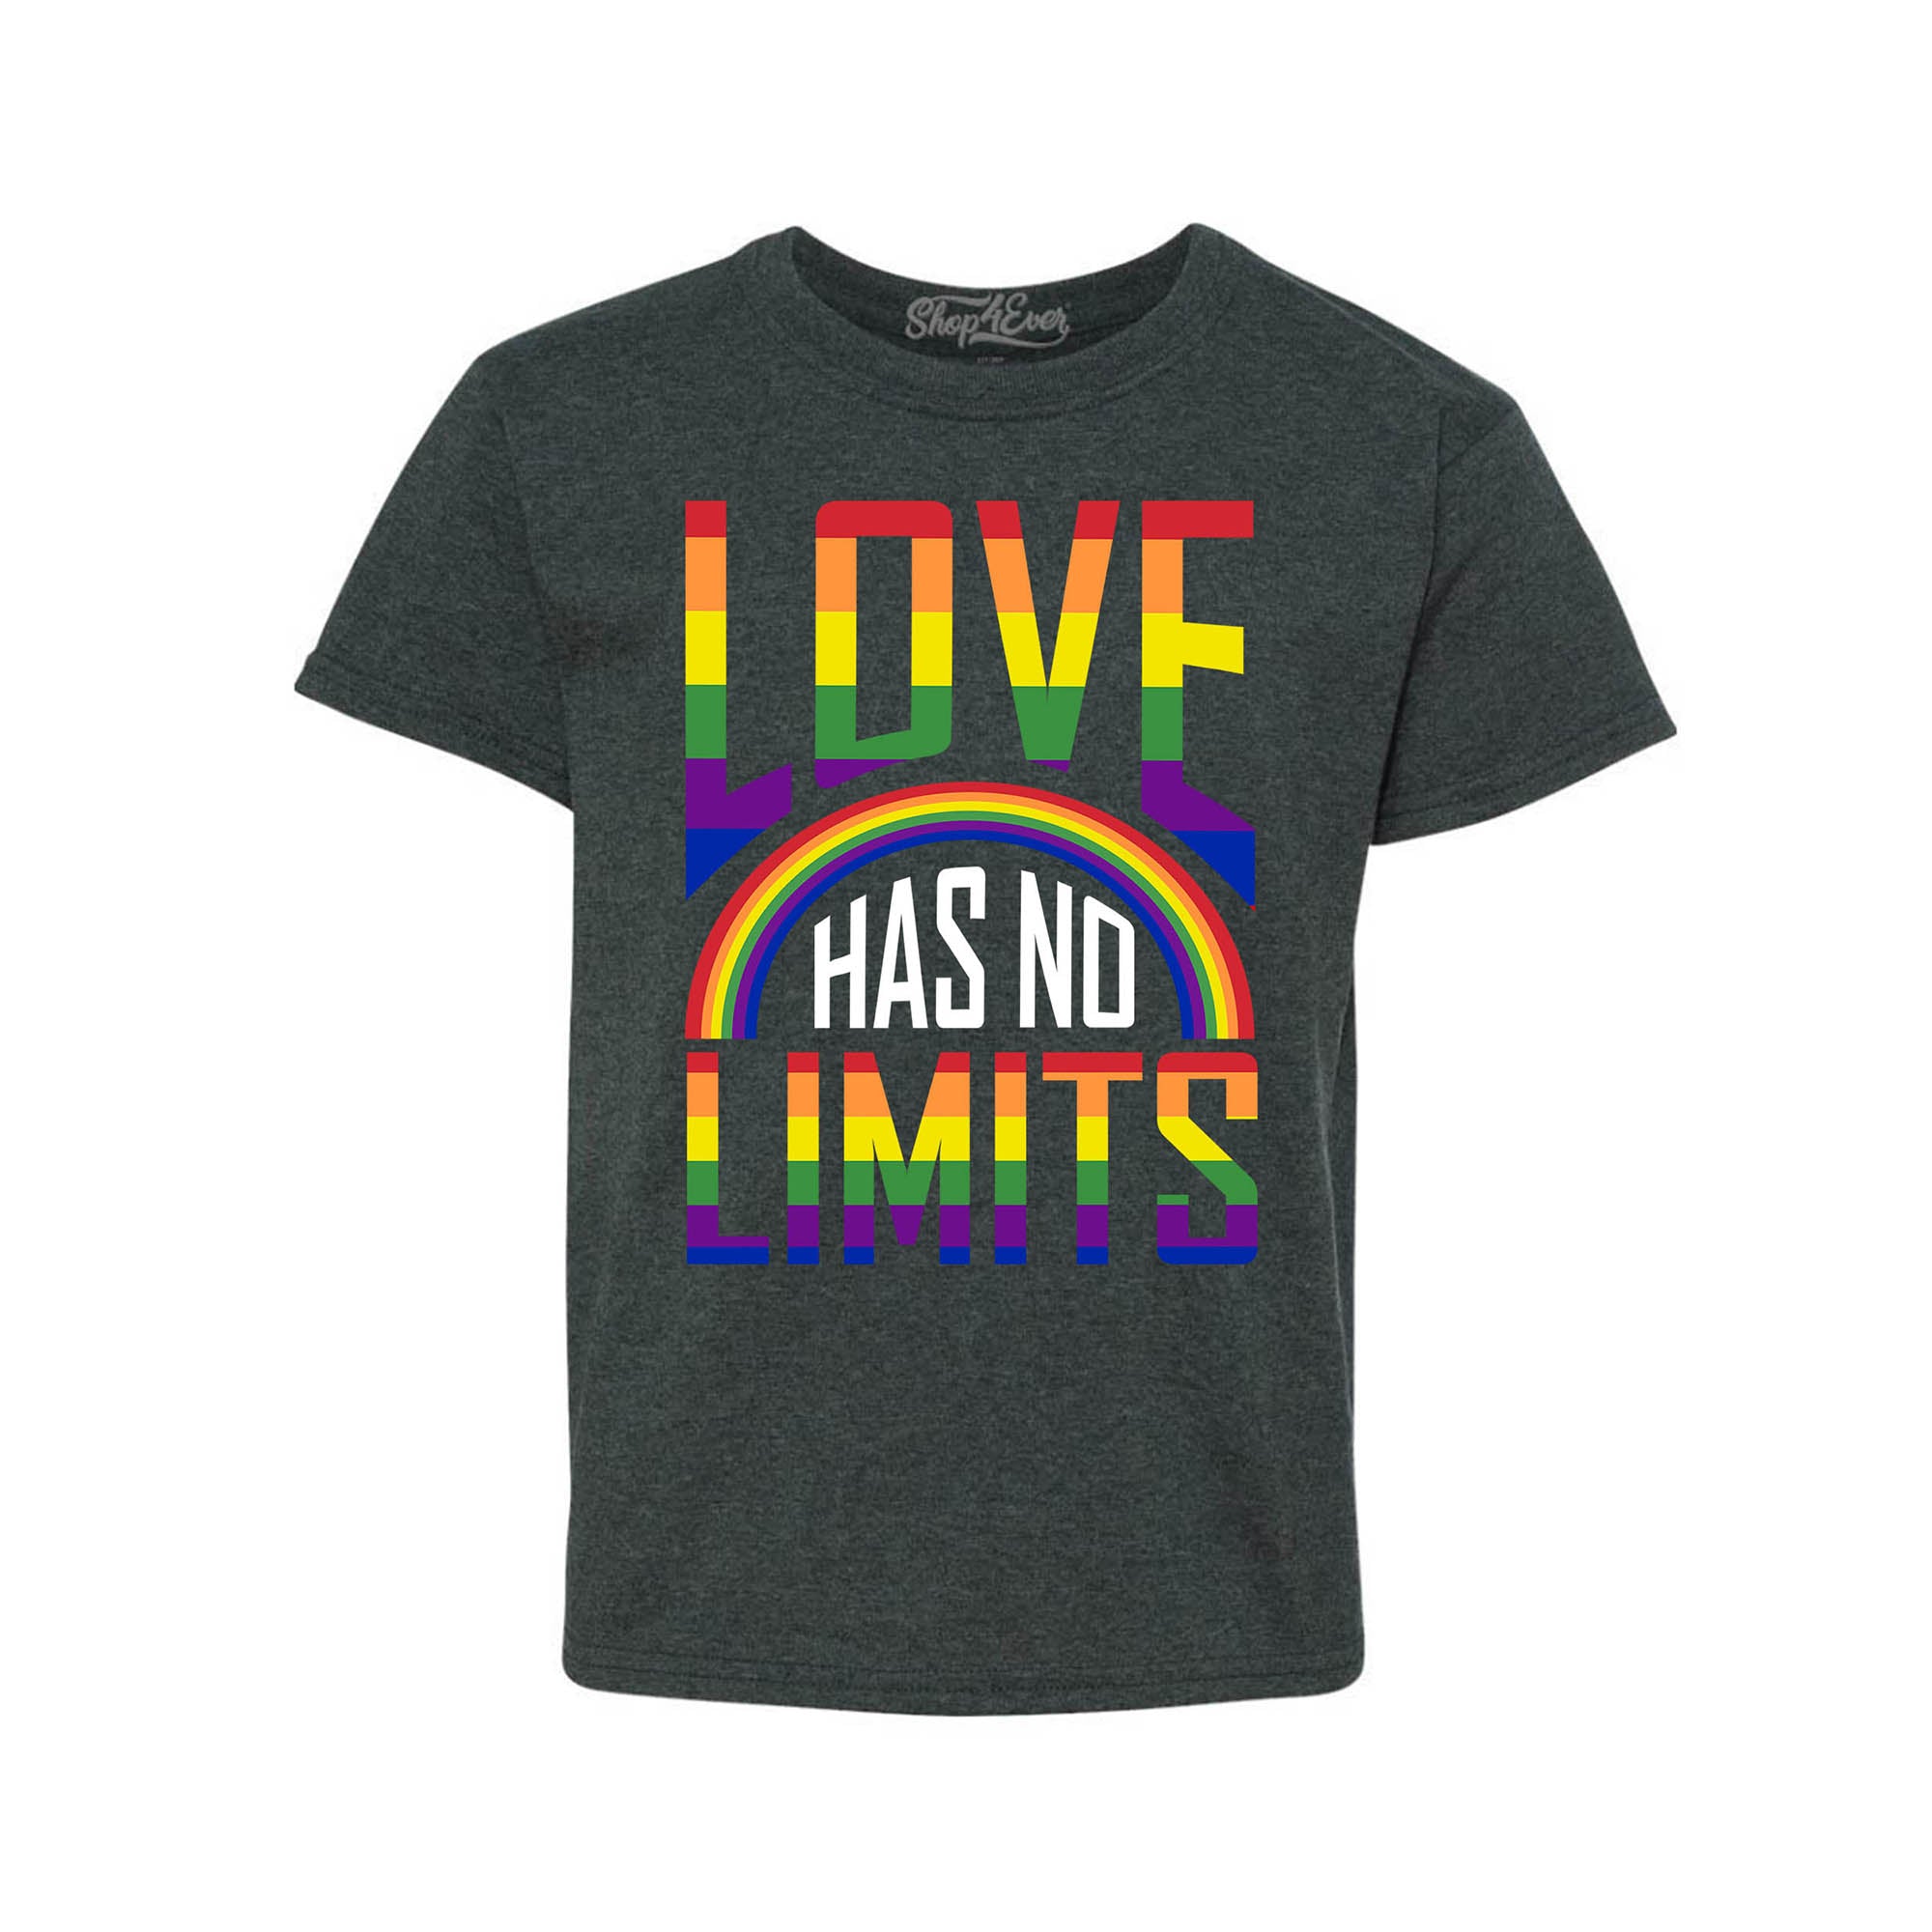 Love Has No Limits ~ Gay Pride Youth's T-Shirt Child Kids Tee